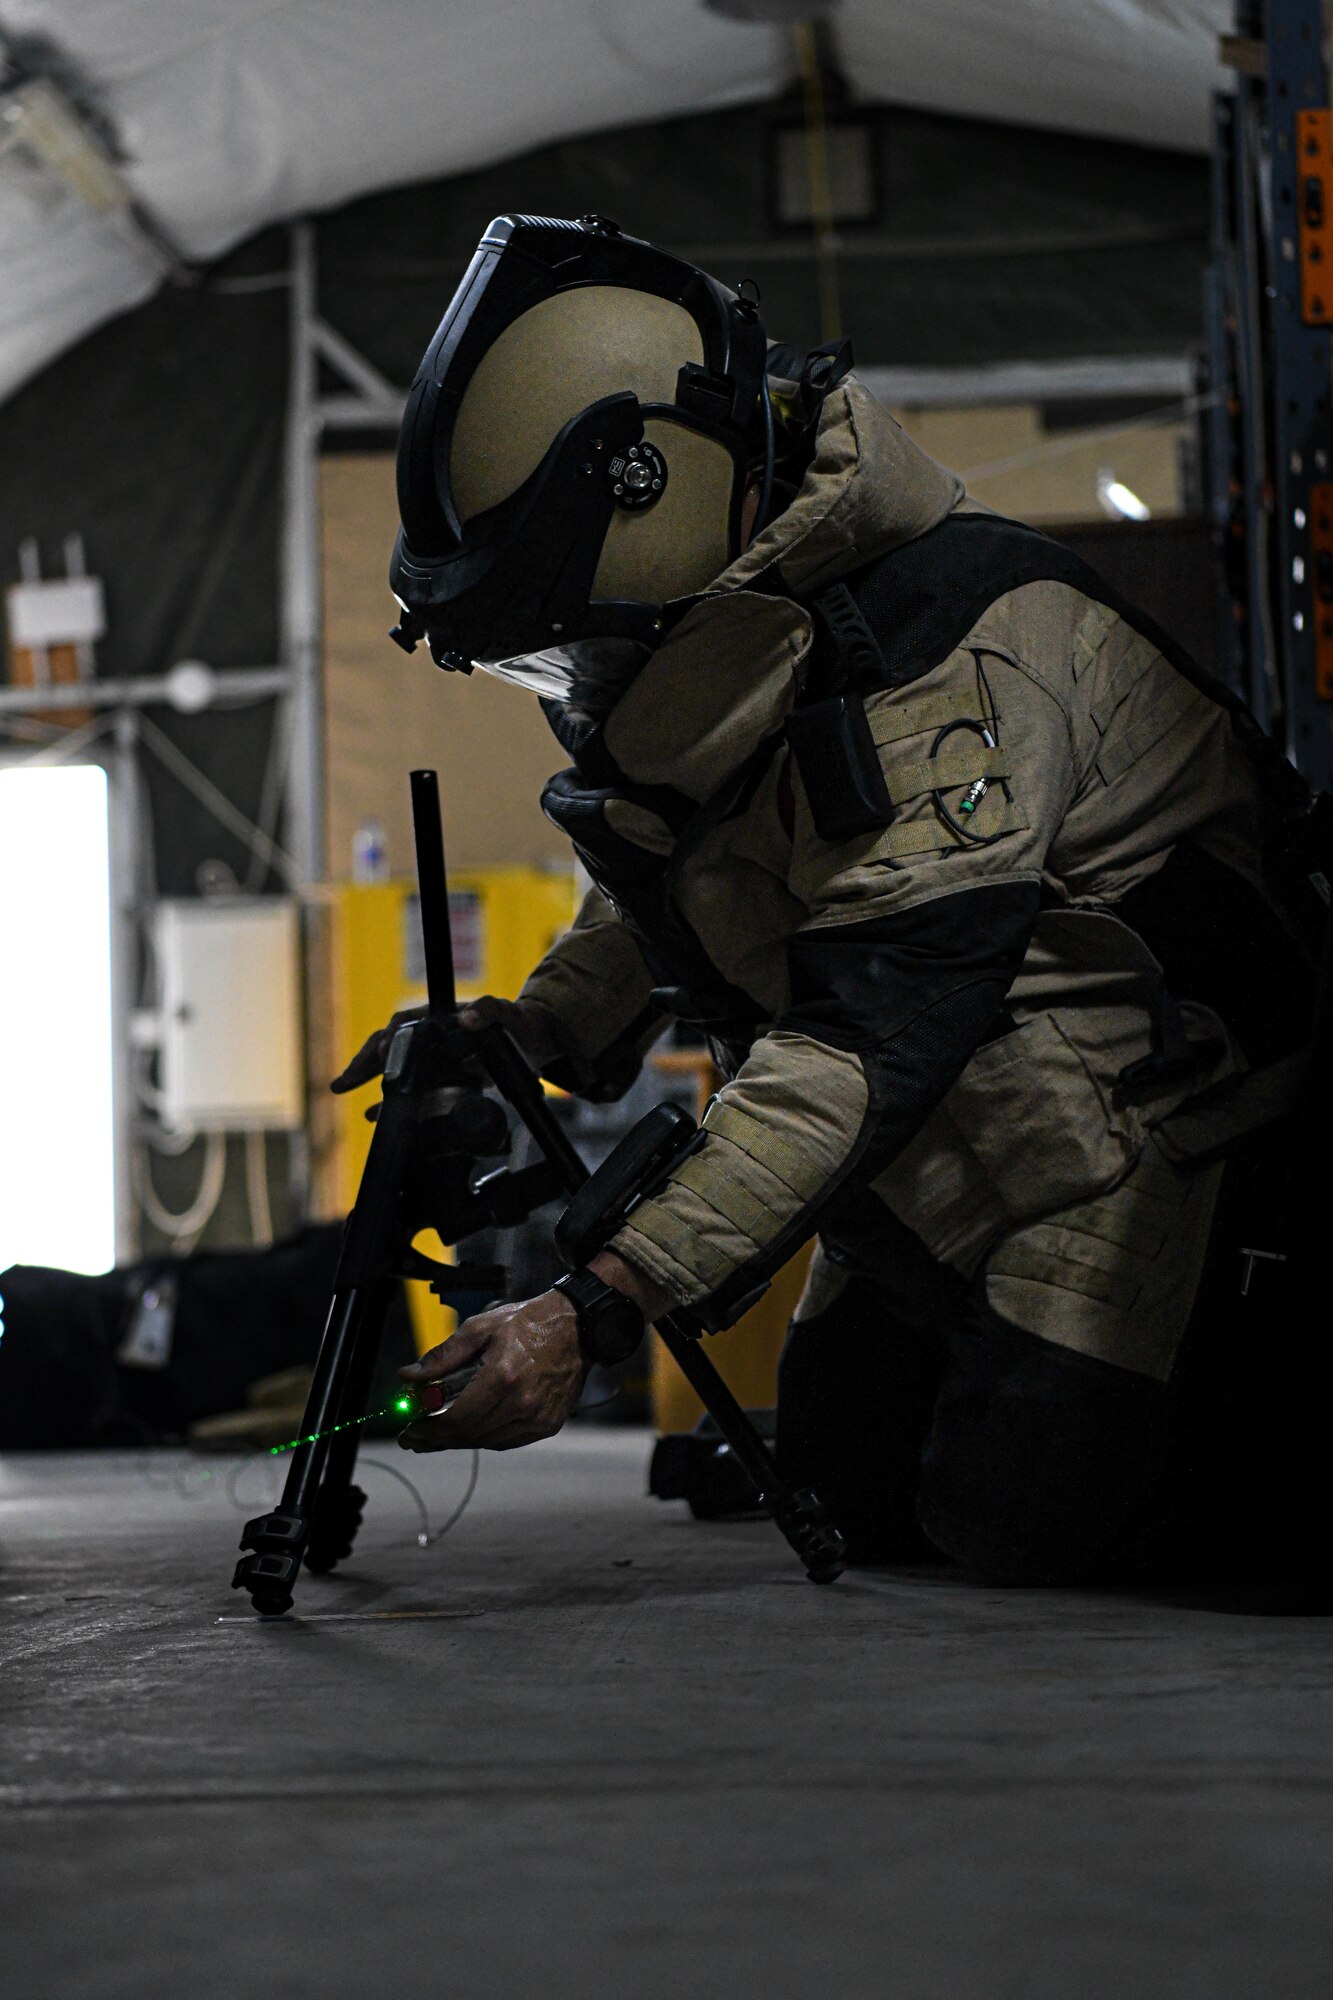 The 380th Expeditionary Civil Engineer Squadron’s Explosive Ordinance Disposal section hosted an EOD skills challenge September 5-9, 2022, at Al Dhafra Air Base, United Arab Emirates. Three teams of two were presented with various challenges to test their abilities as EOD technicians.